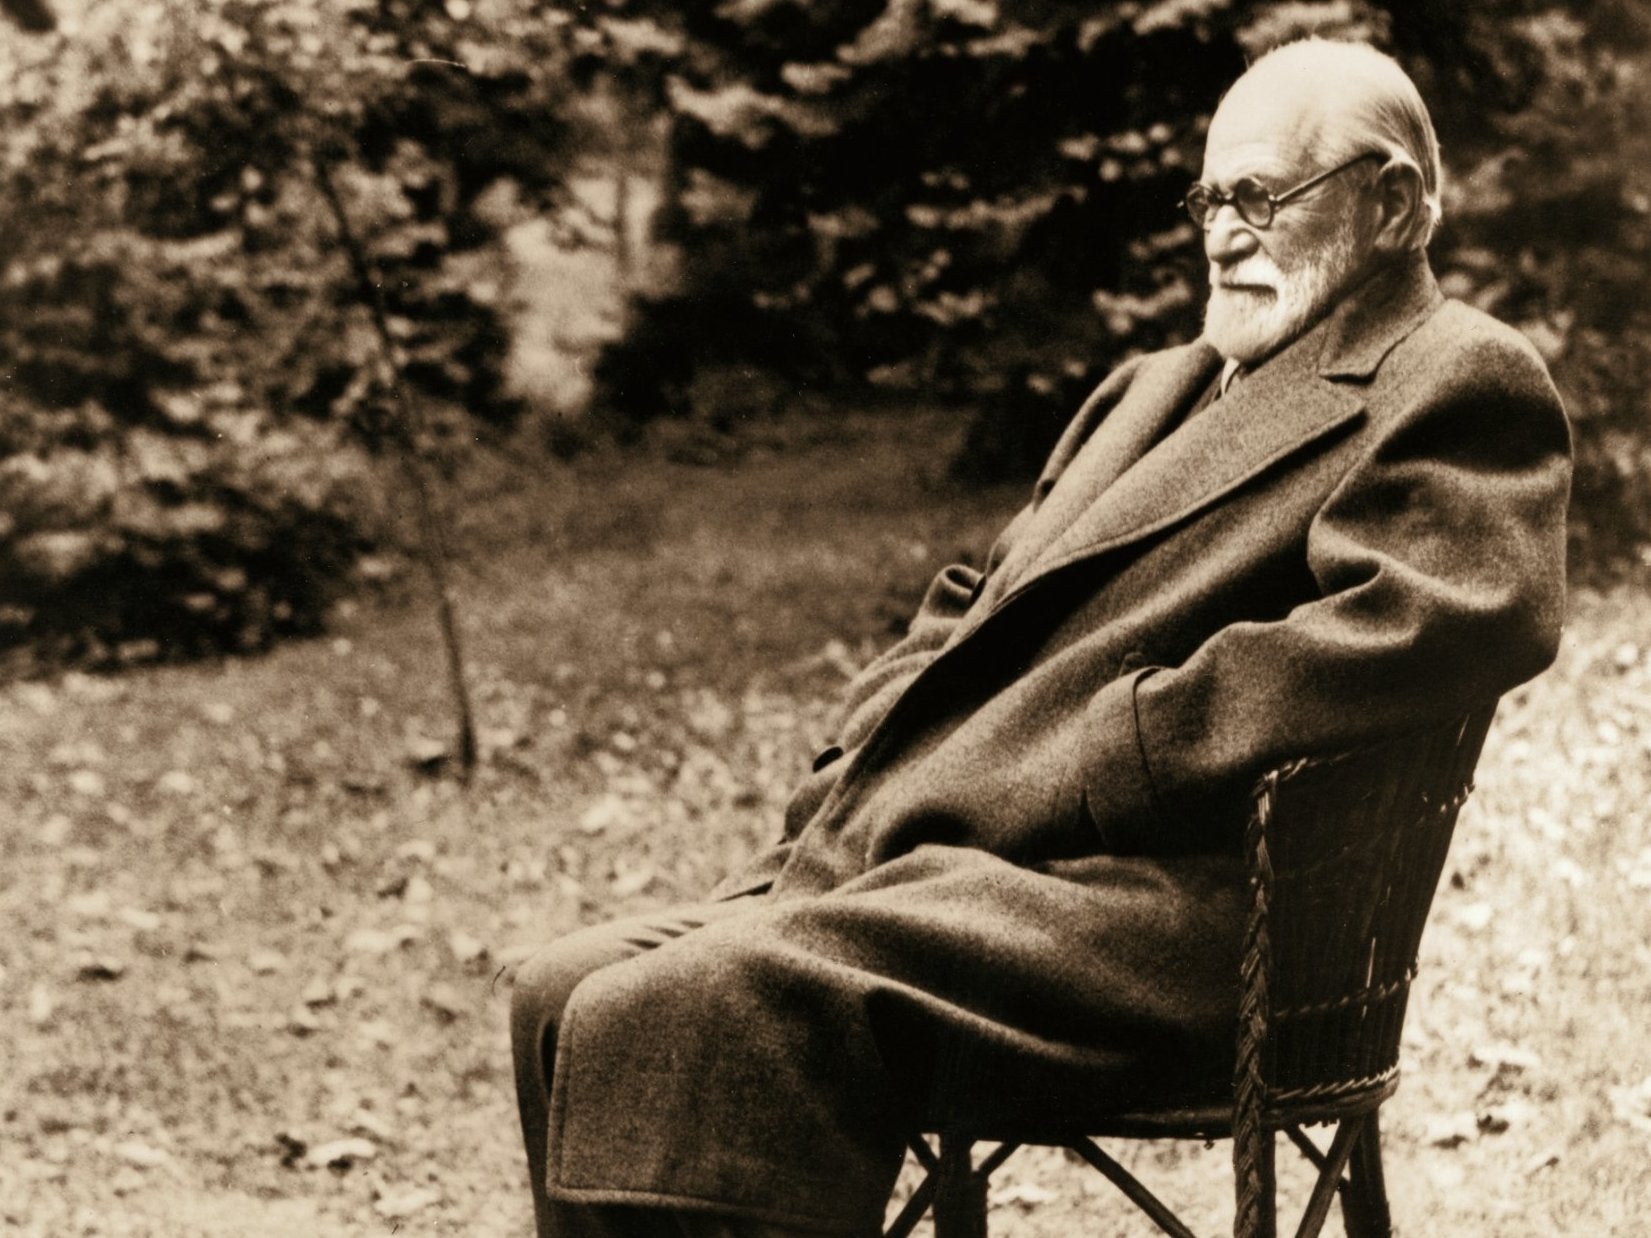 Sigmund Freud came up with new explanations of how depression arises